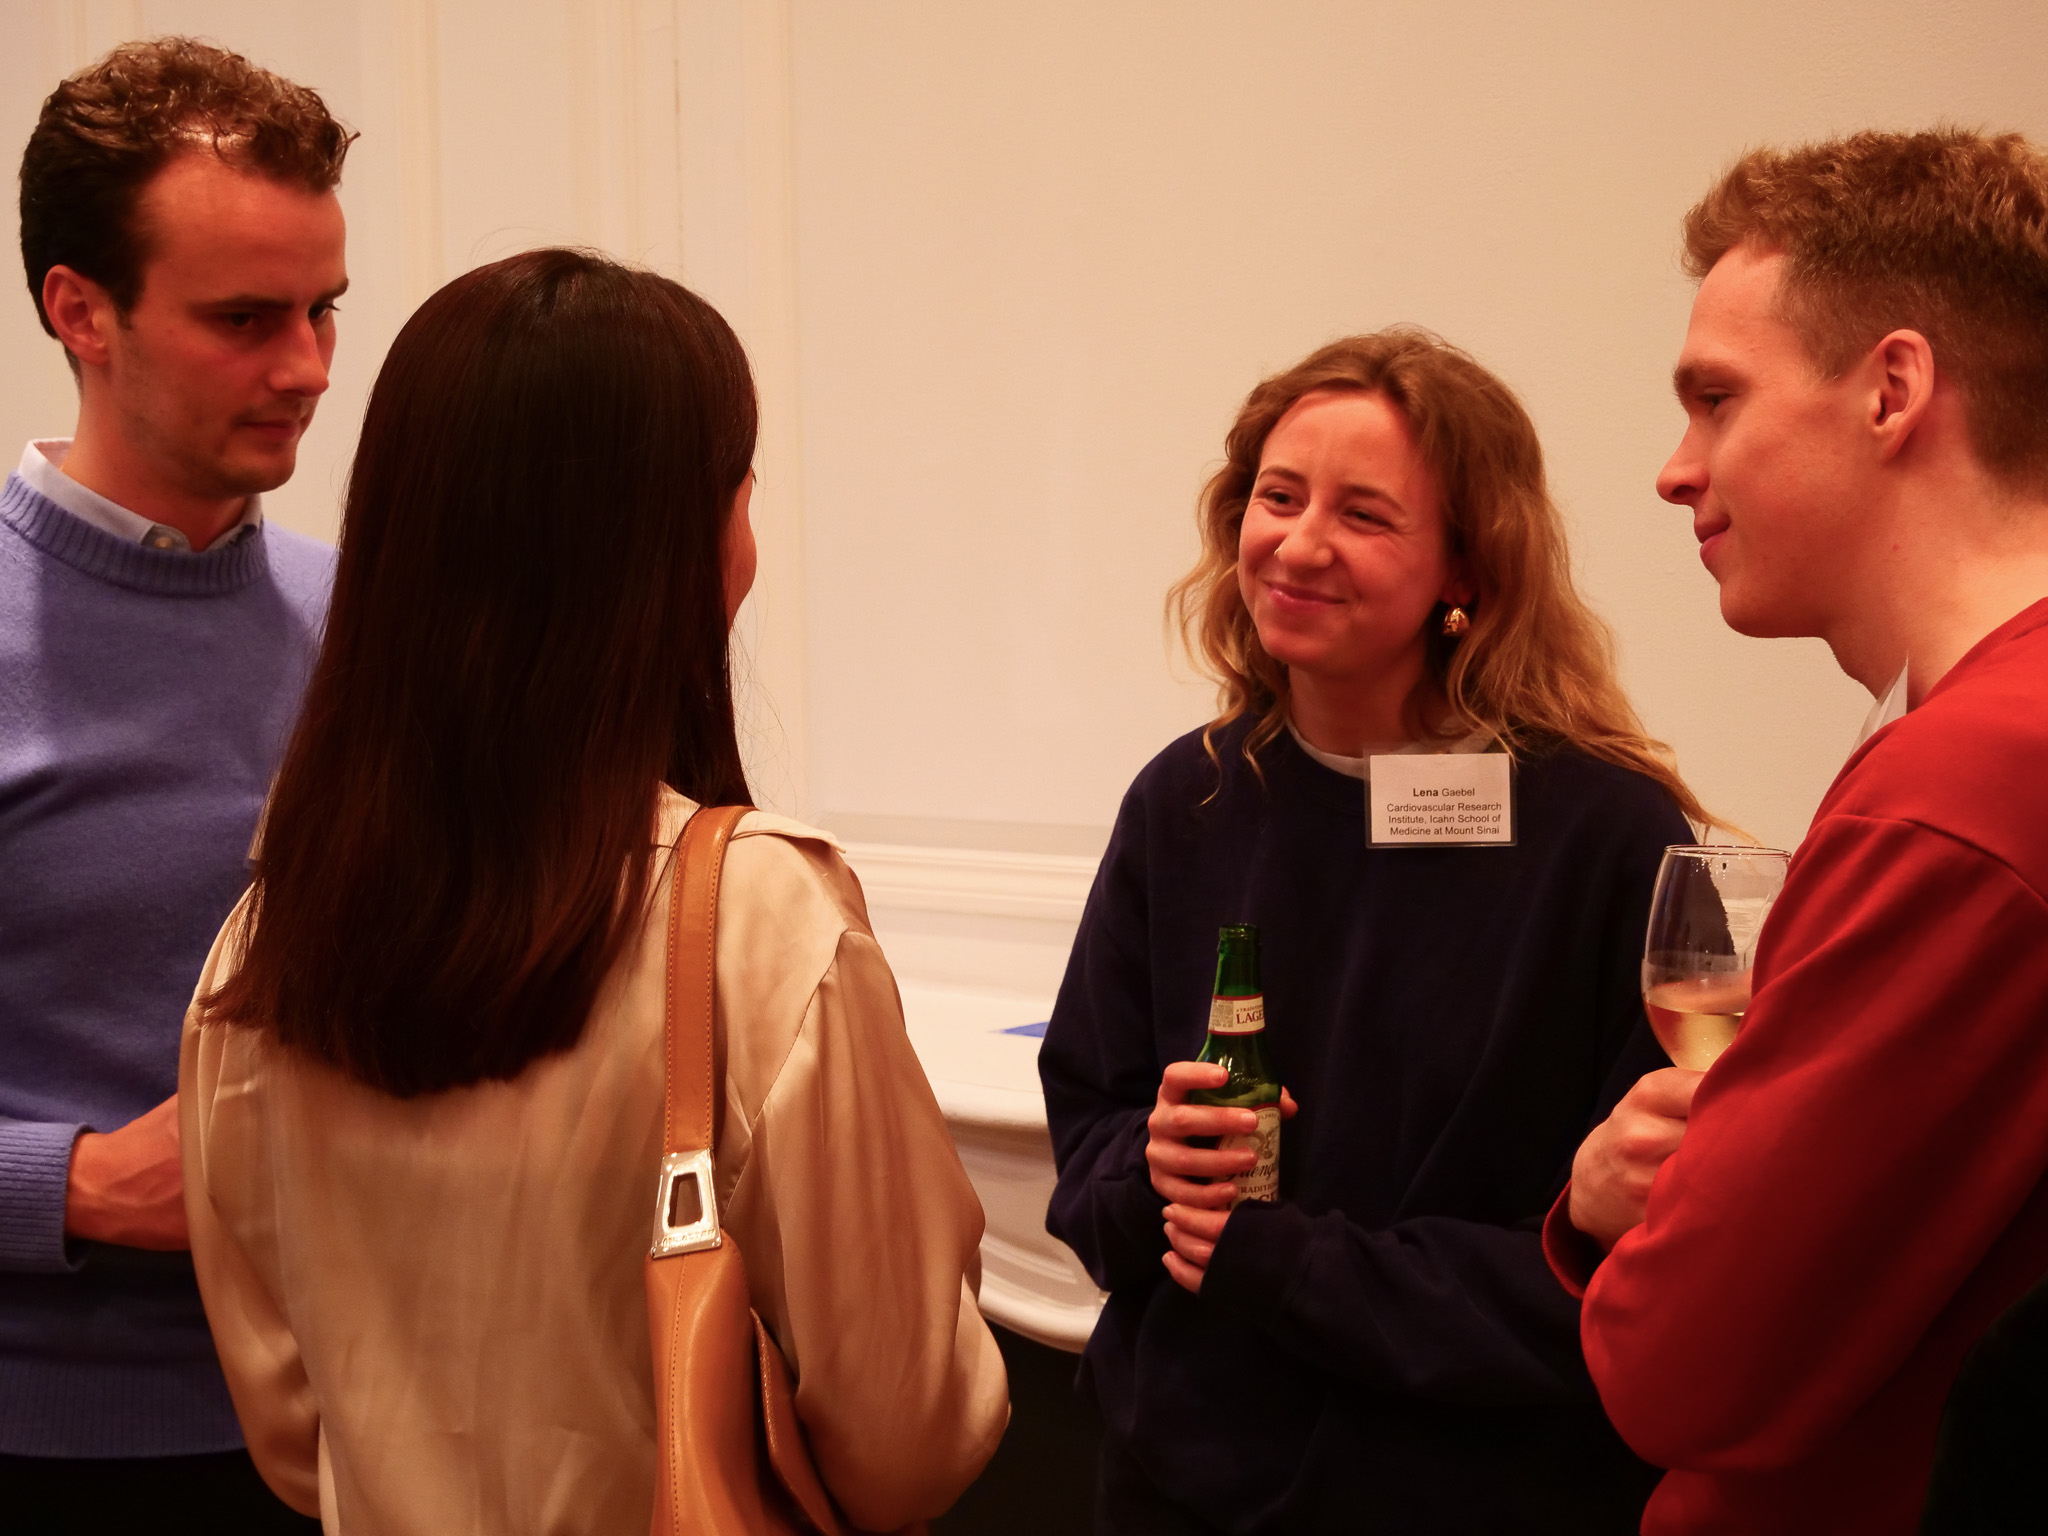 Impressions from the networking reception in New York: Networking in action